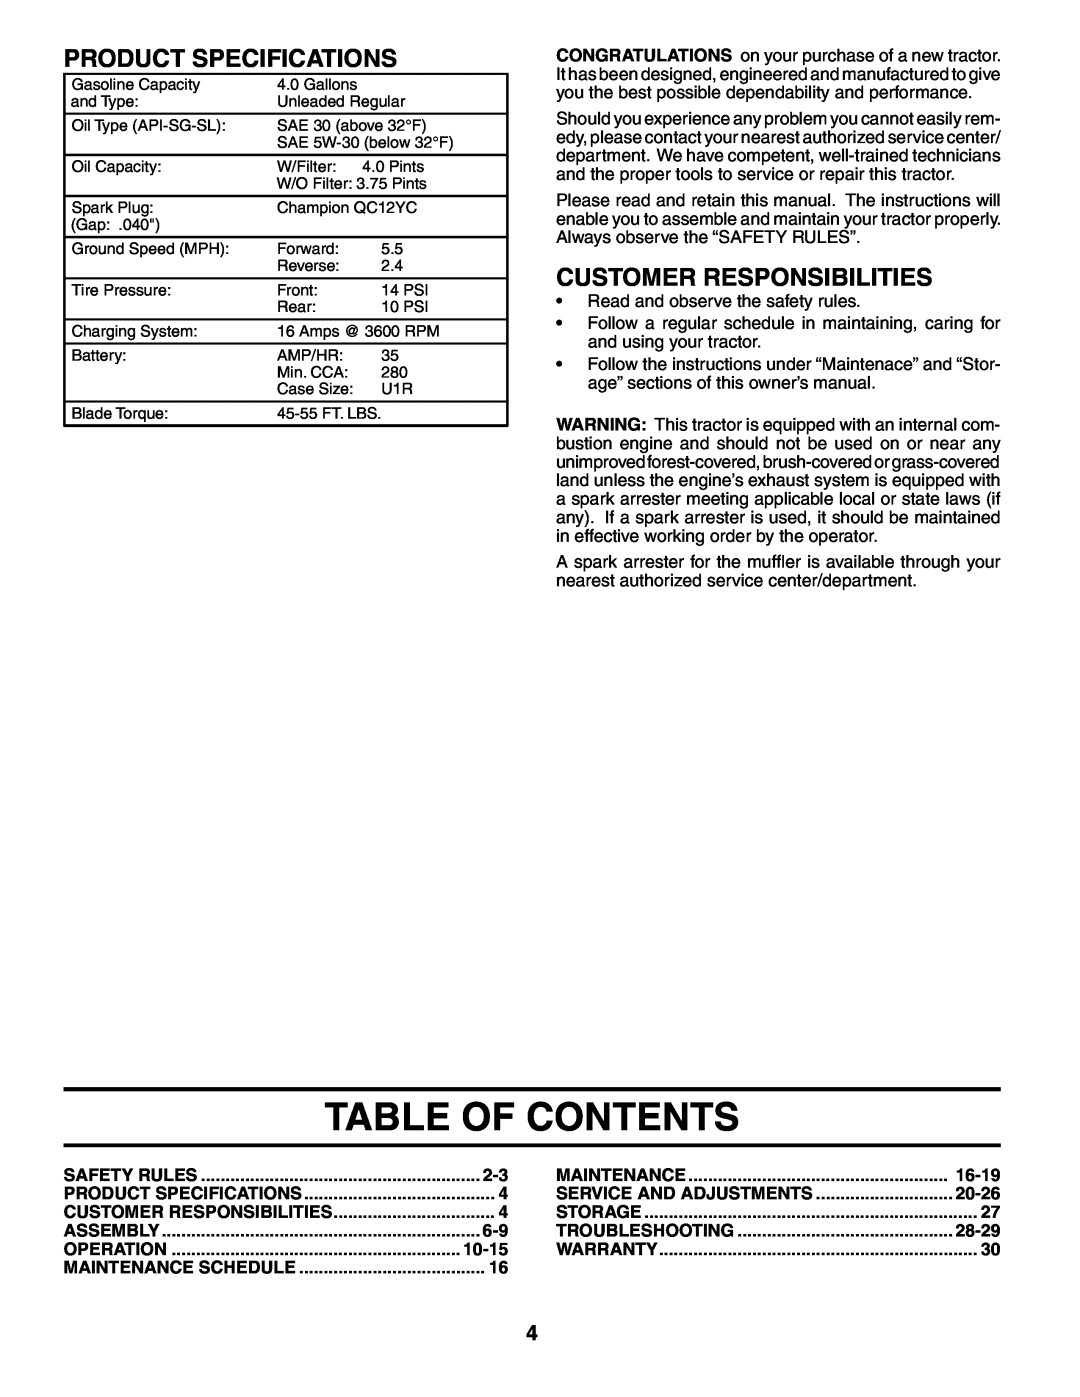 Poulan DB27H48YT manual Table Of Contents, Product Specifications, Customer Responsibilities, 10-15, 16-19, 20-26, 28-29 